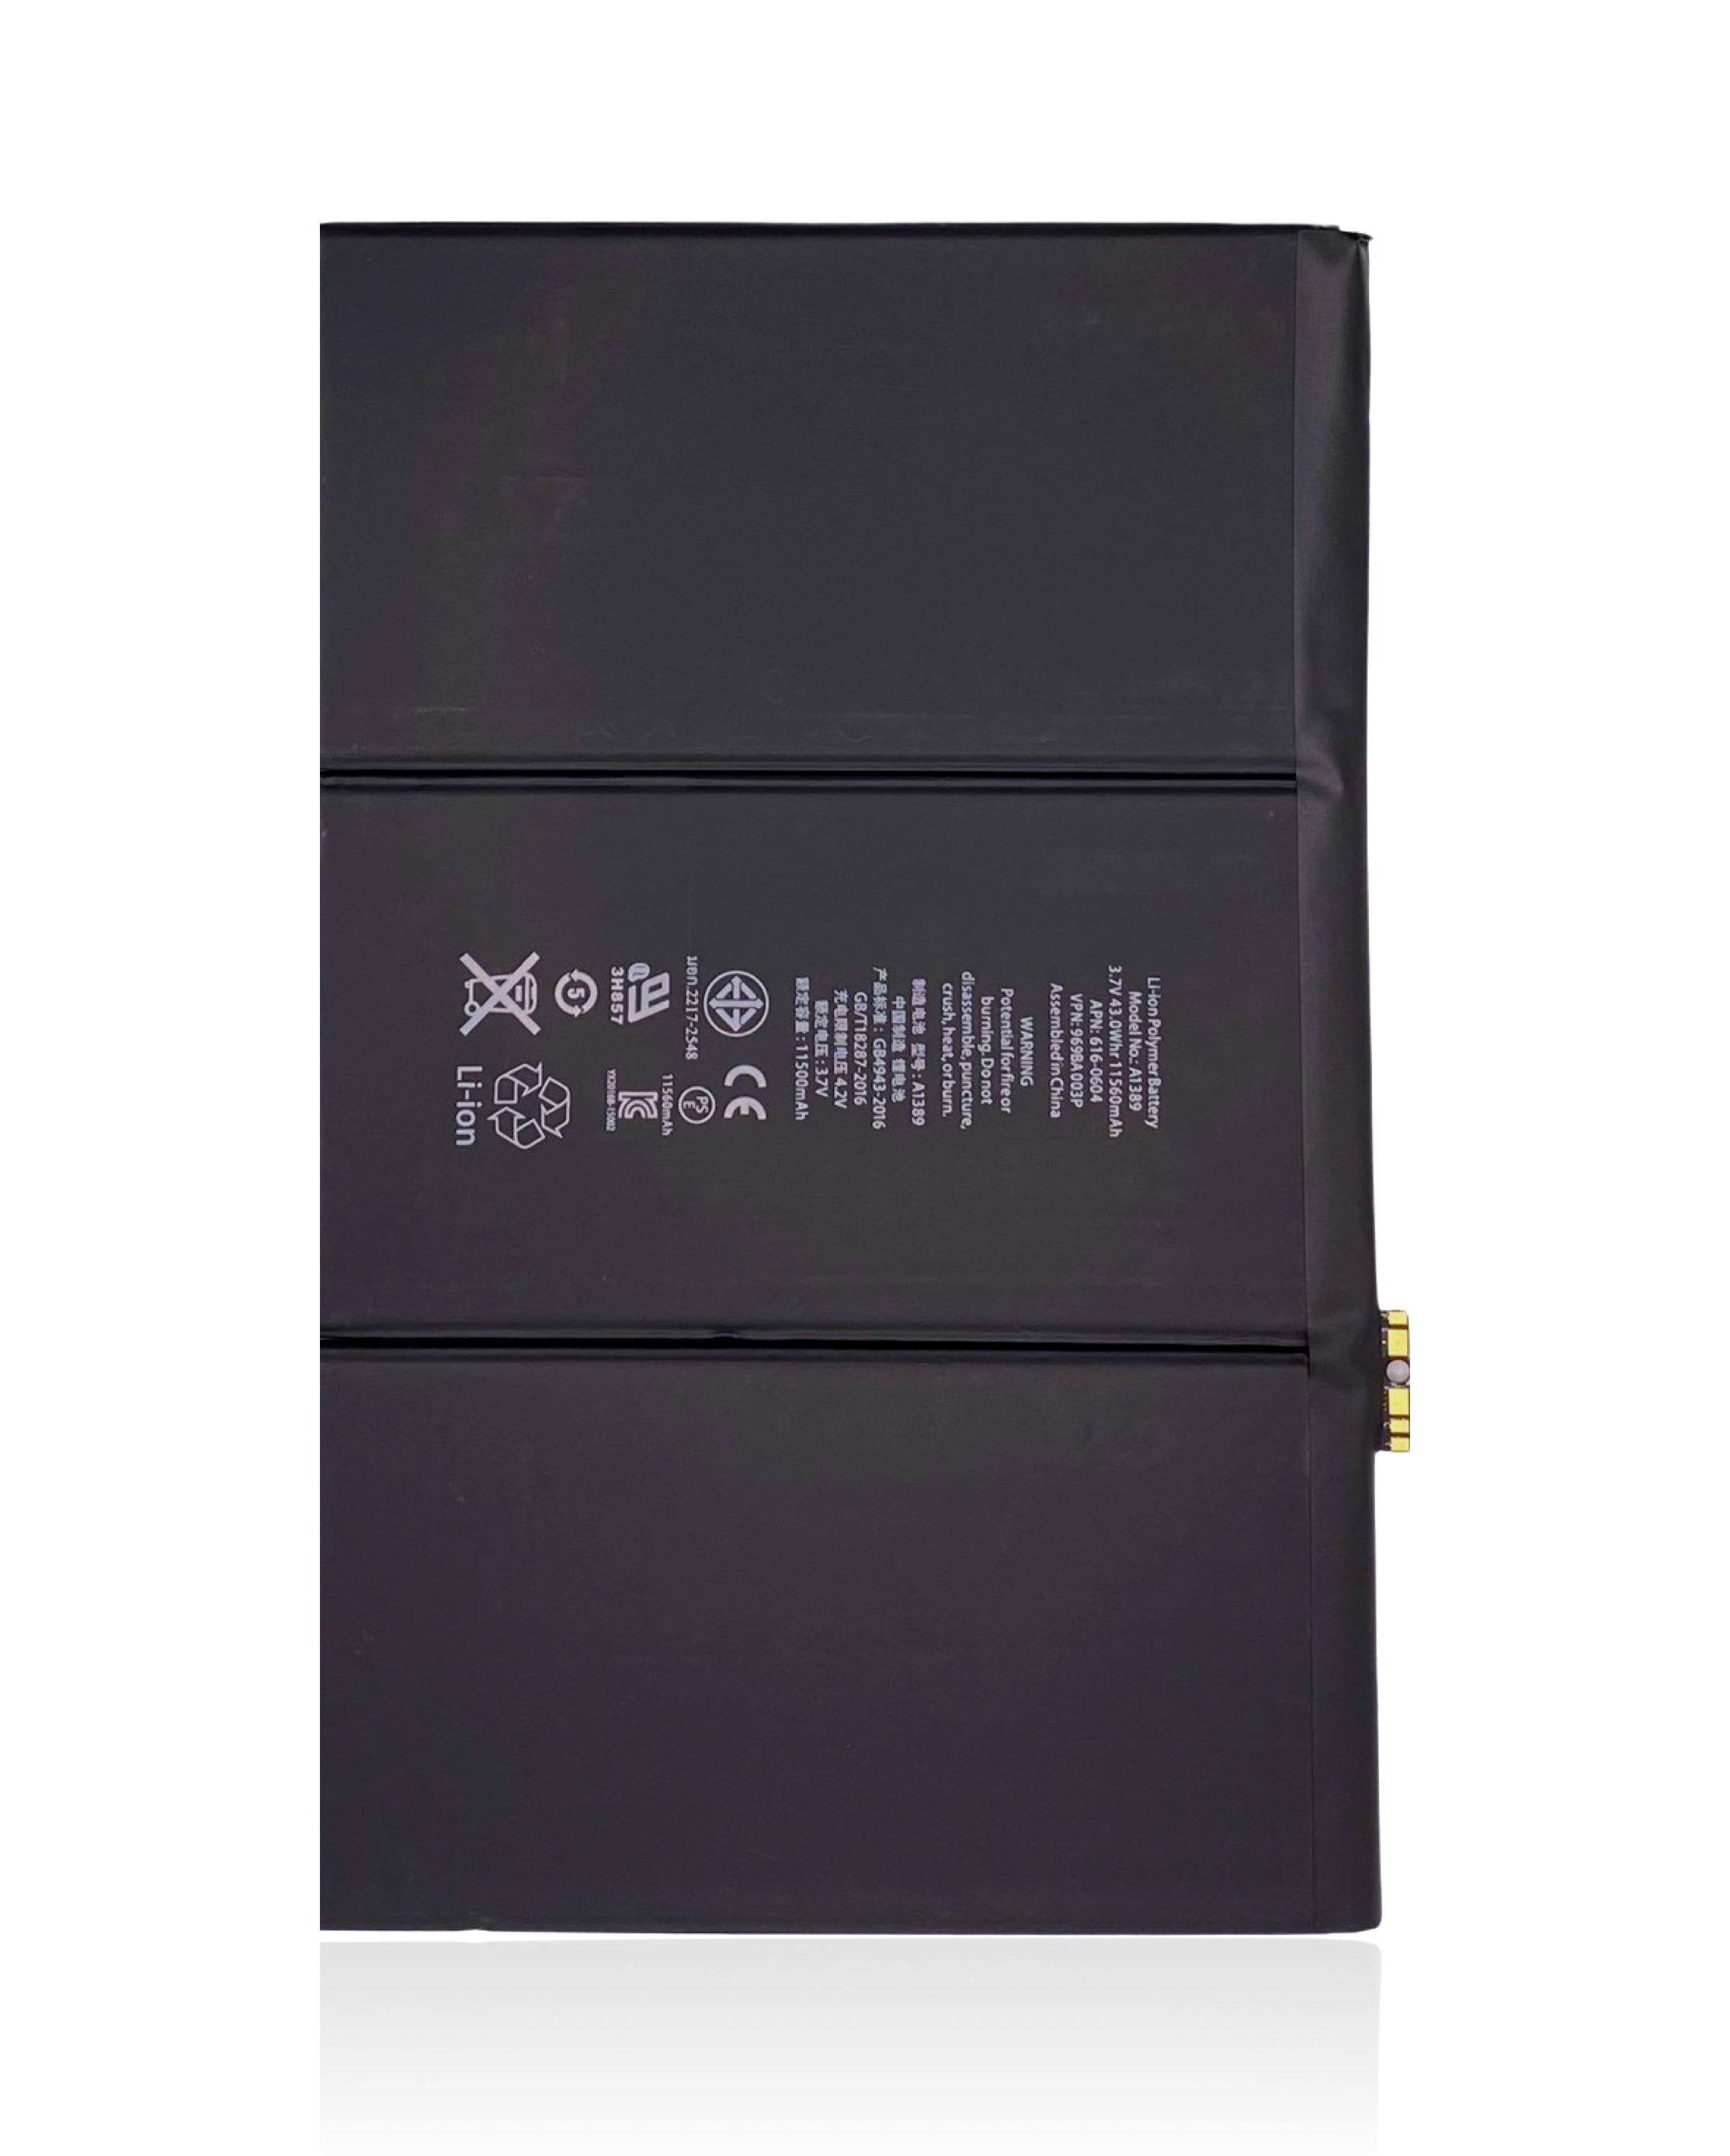 For iPad 3 / iPad 4 Battery Replacement